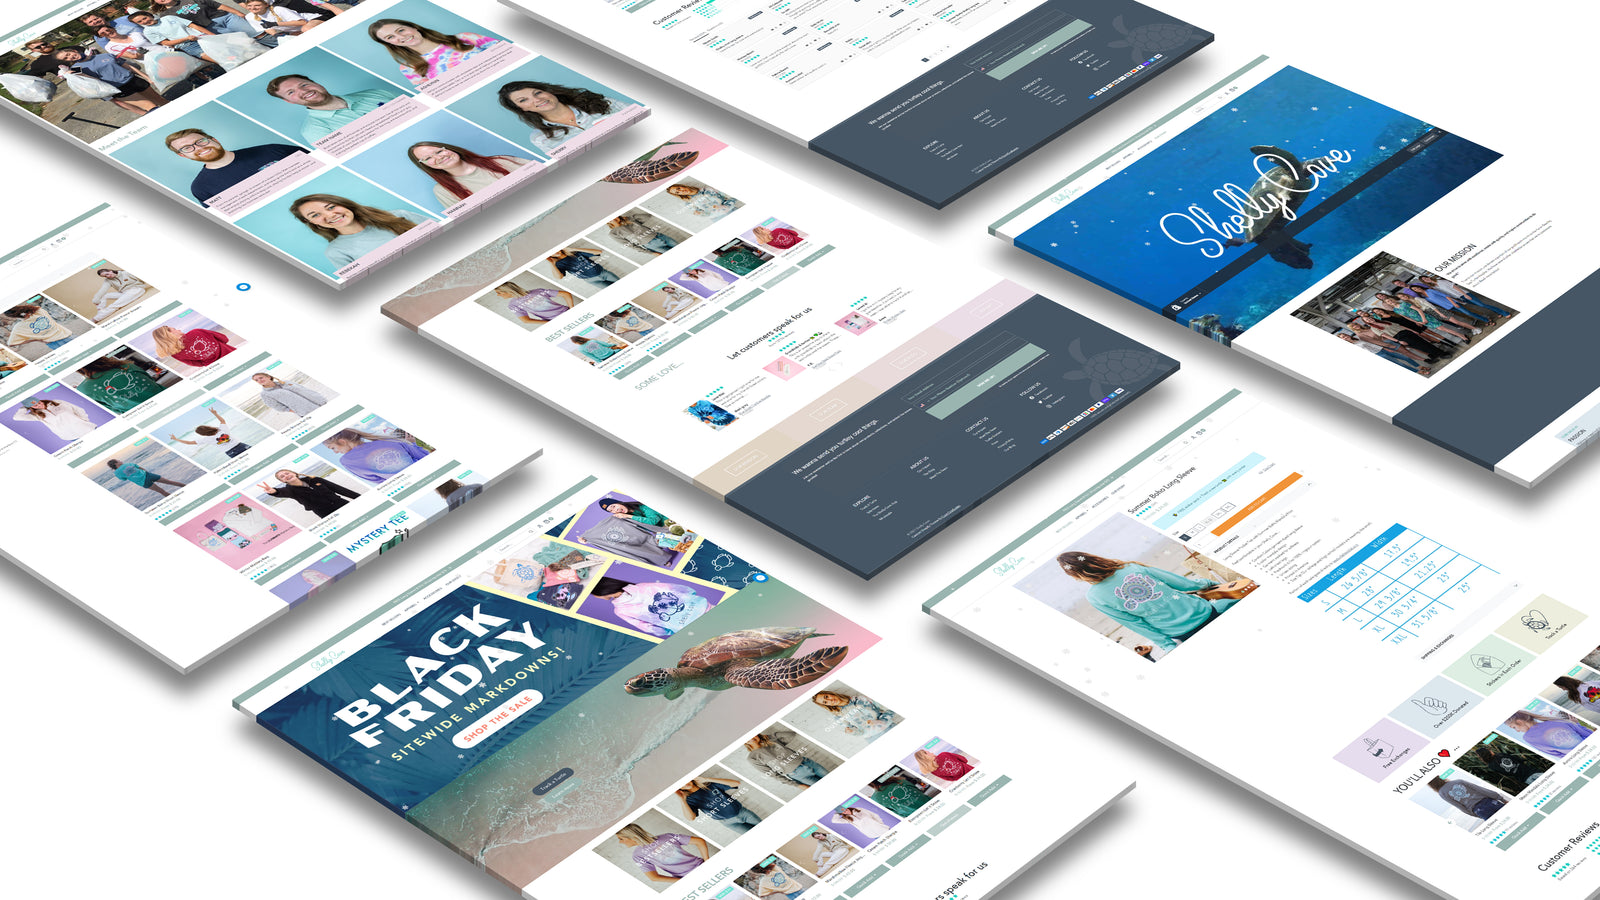  shellycove shopify header banner